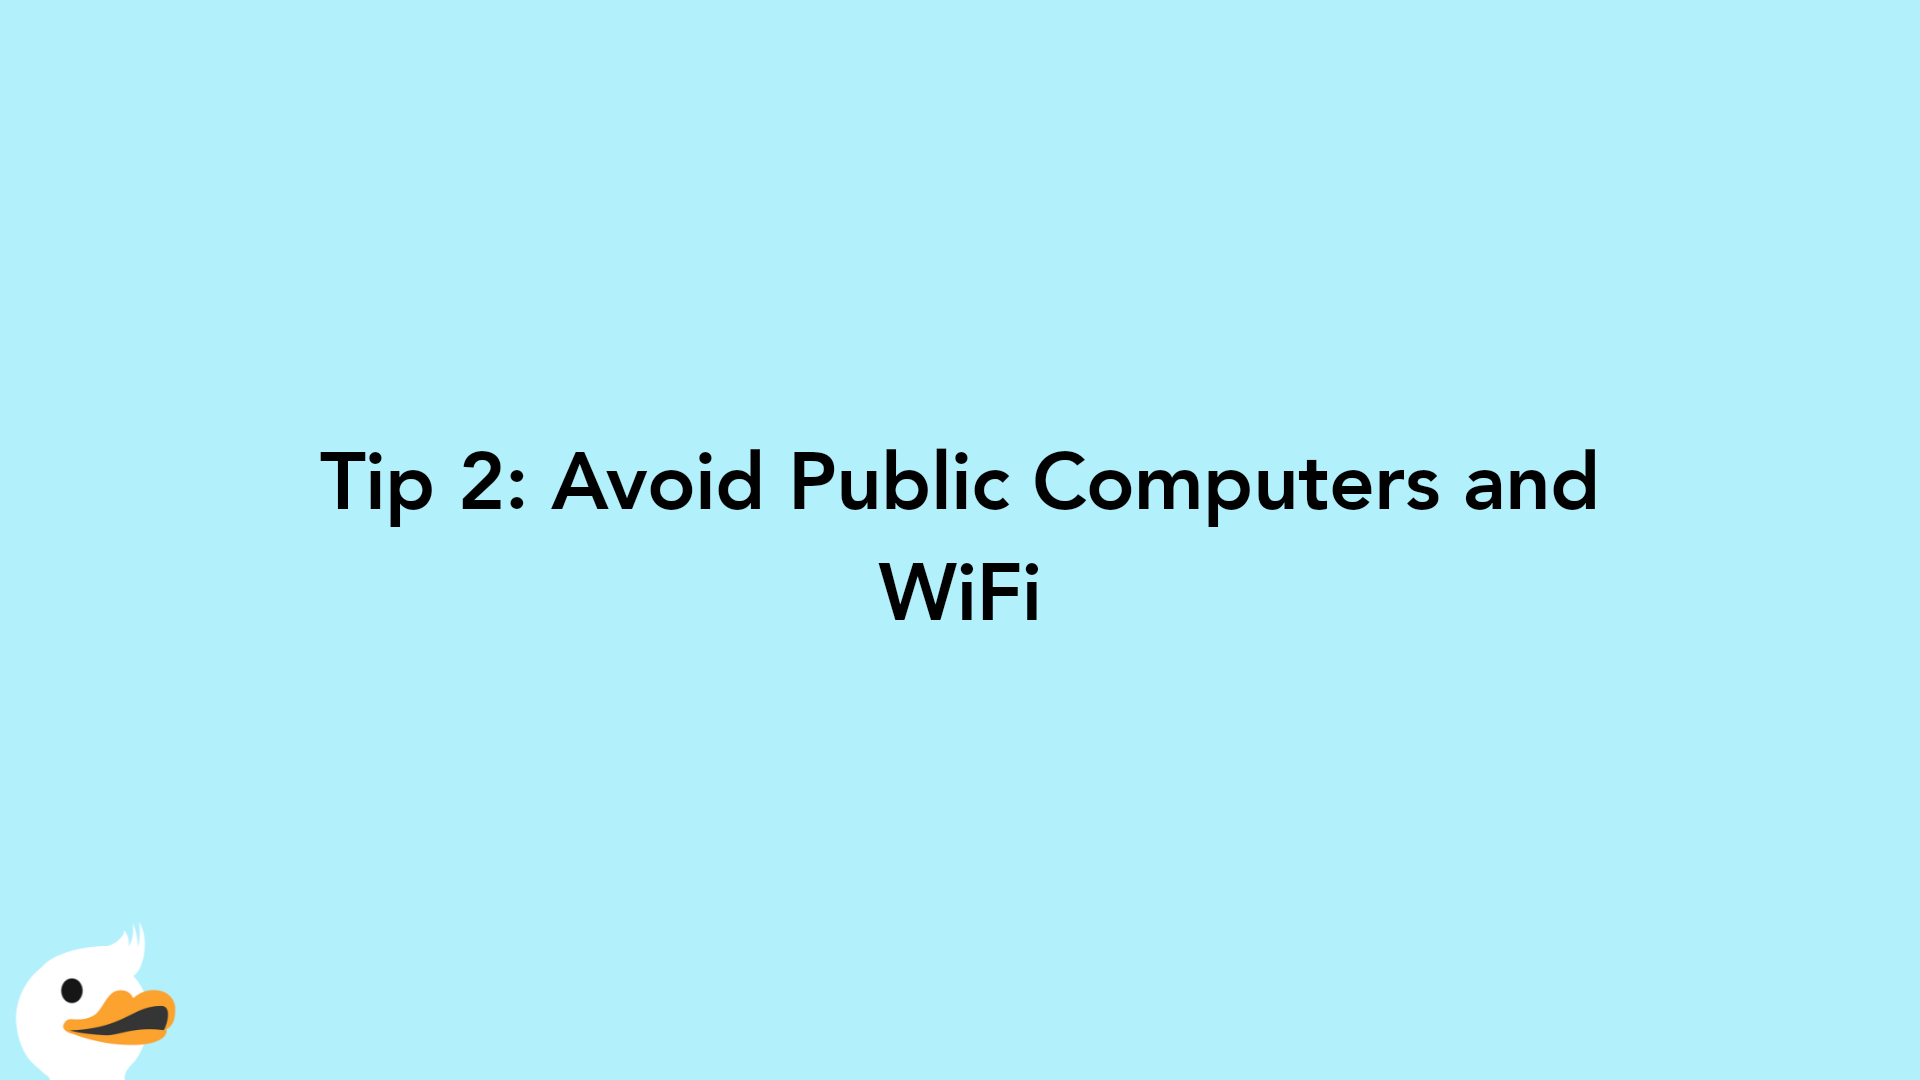 Tip 2: Avoid Public Computers and WiFi